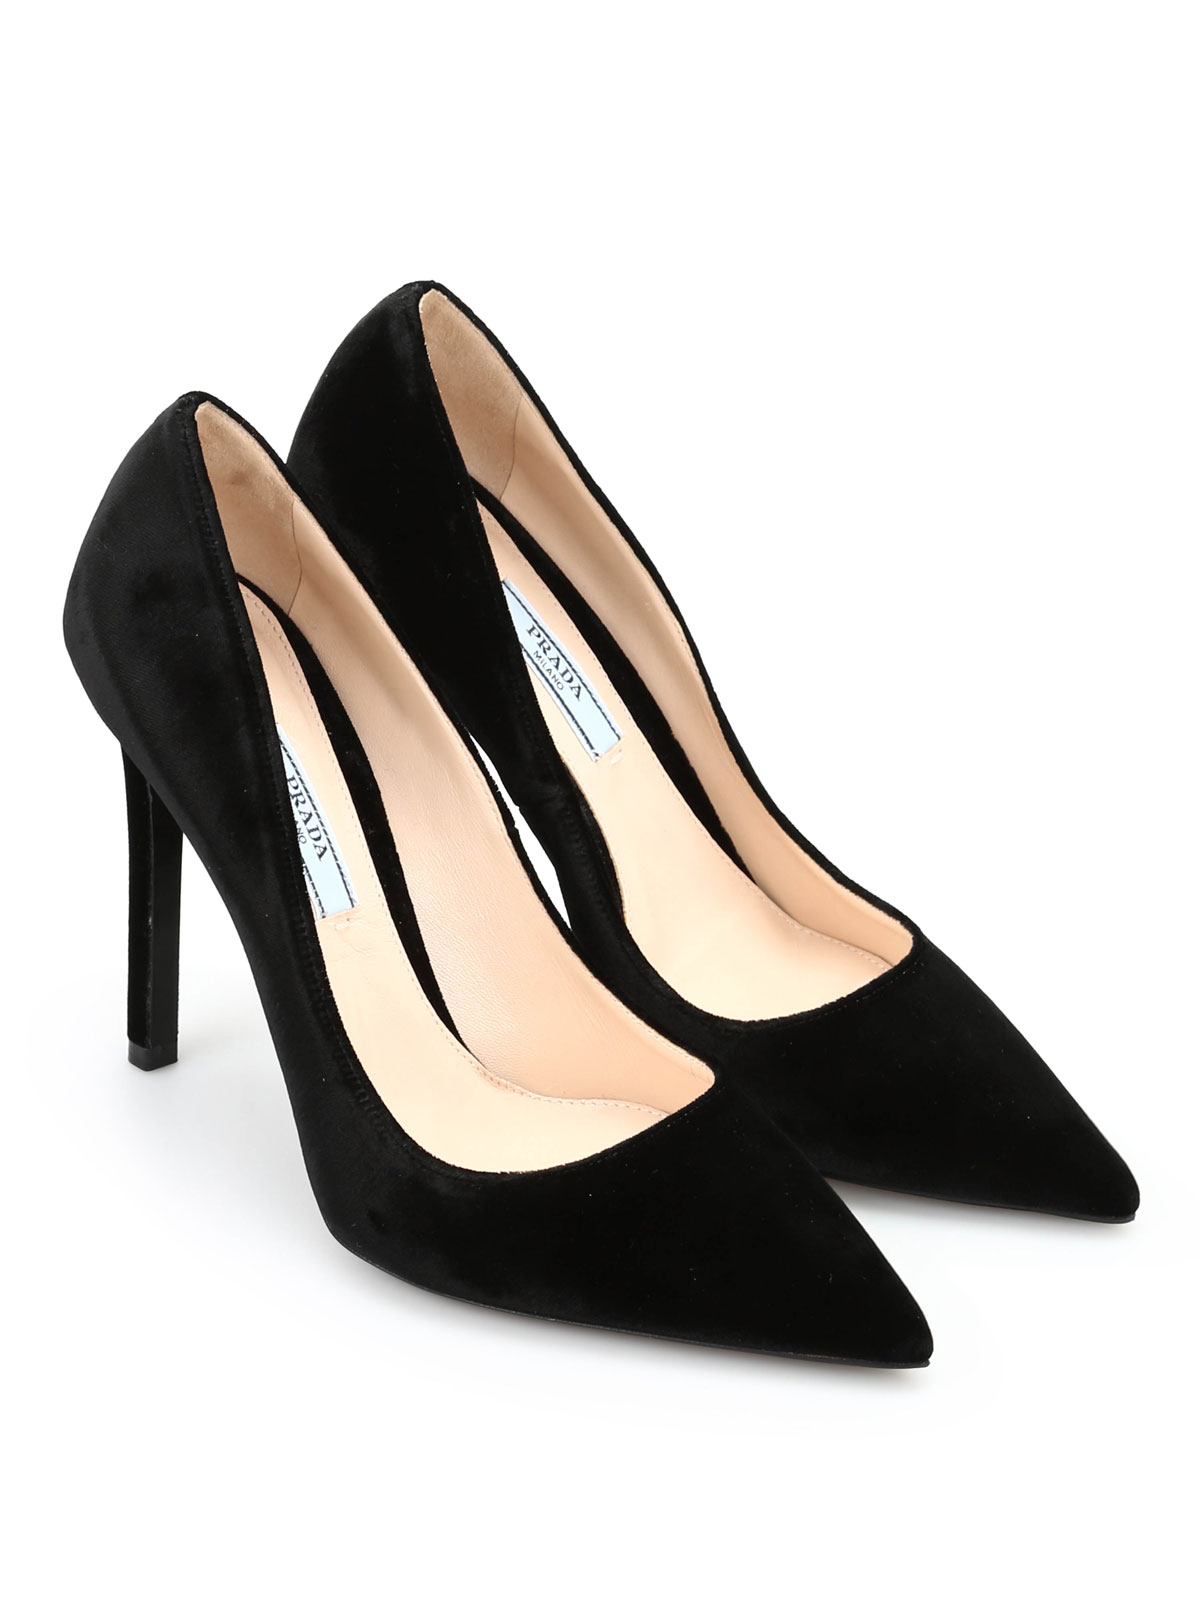 prada-court-shoes-online-velvet-and-leather-court-shoes-00000080727f00s002.jpg